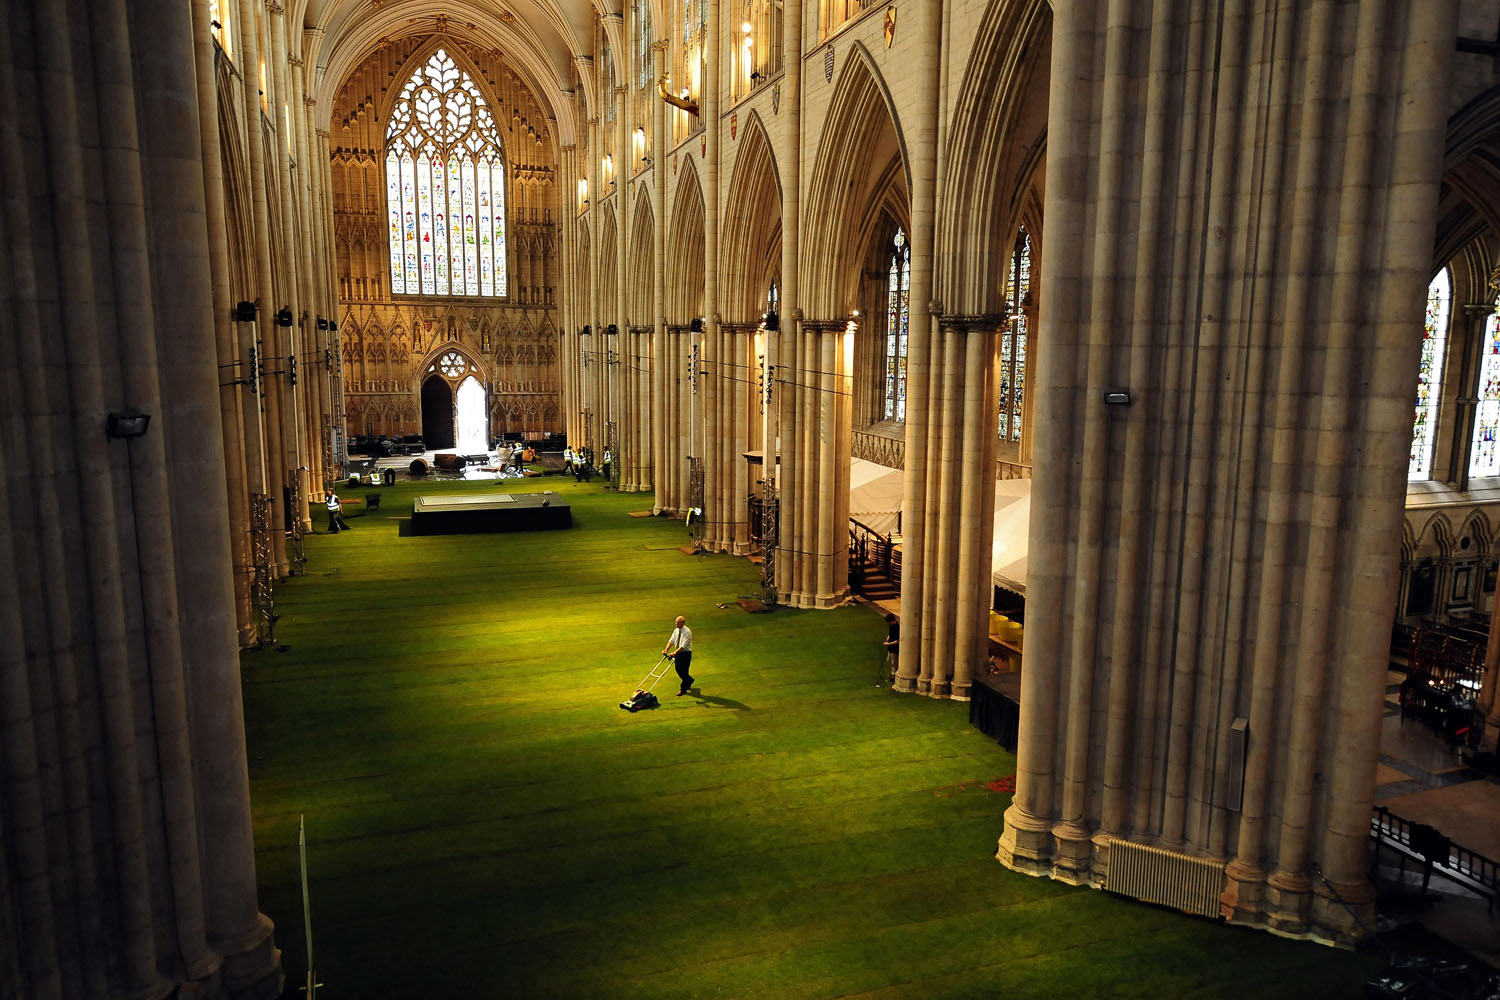 June 6, 2012. The Nave of York Minster is covered in 1500 square meters of real grass as the Minster is prepared for the York Minster Rose Dinner.